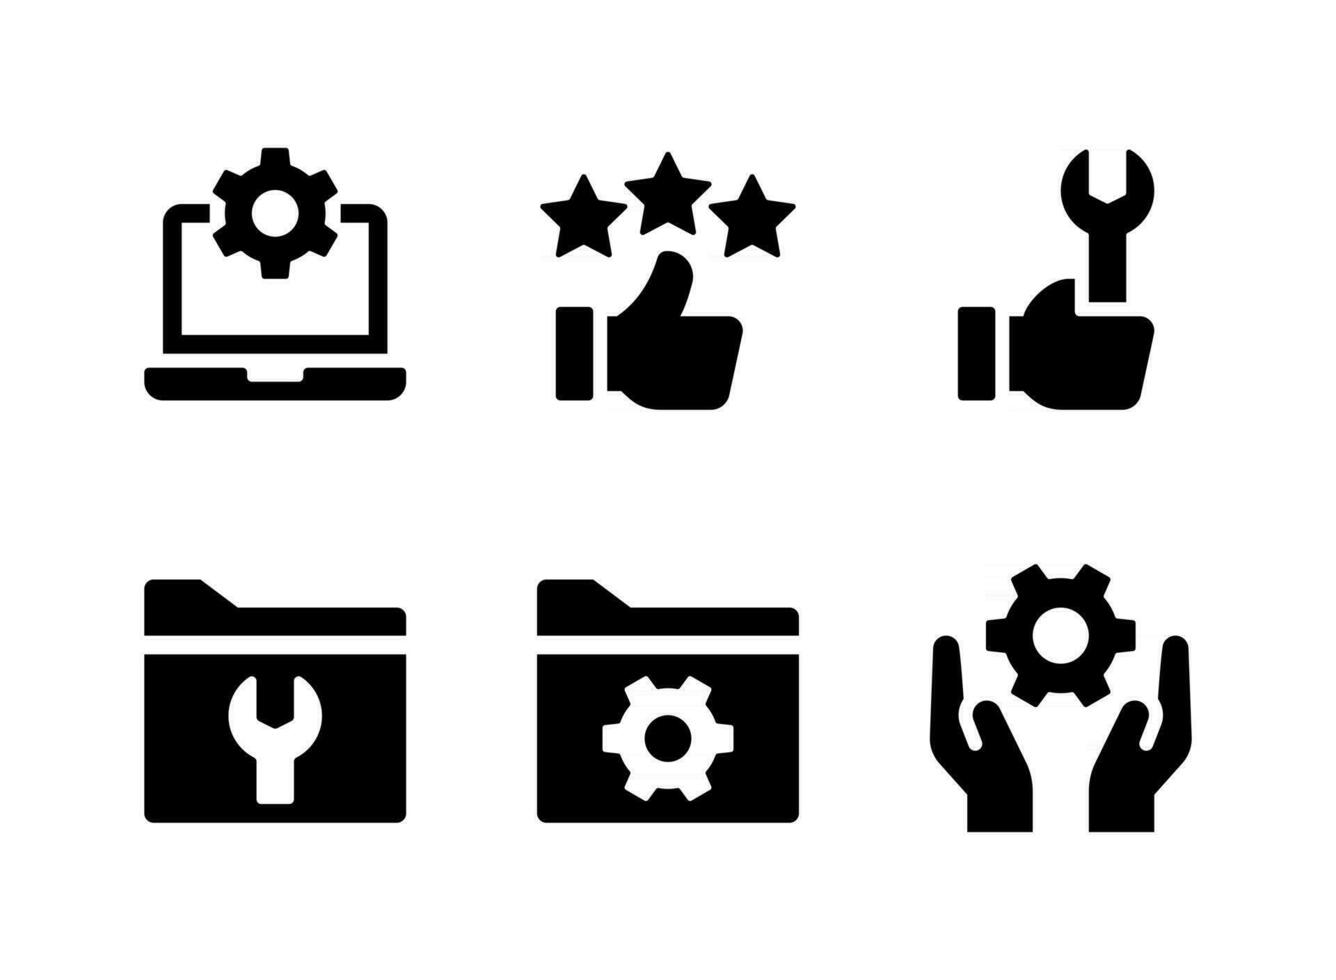 Simple Set of Help and Support Related Vector Solid Icons. Contains Icons as Thumbs Up, System Support, Development and more.